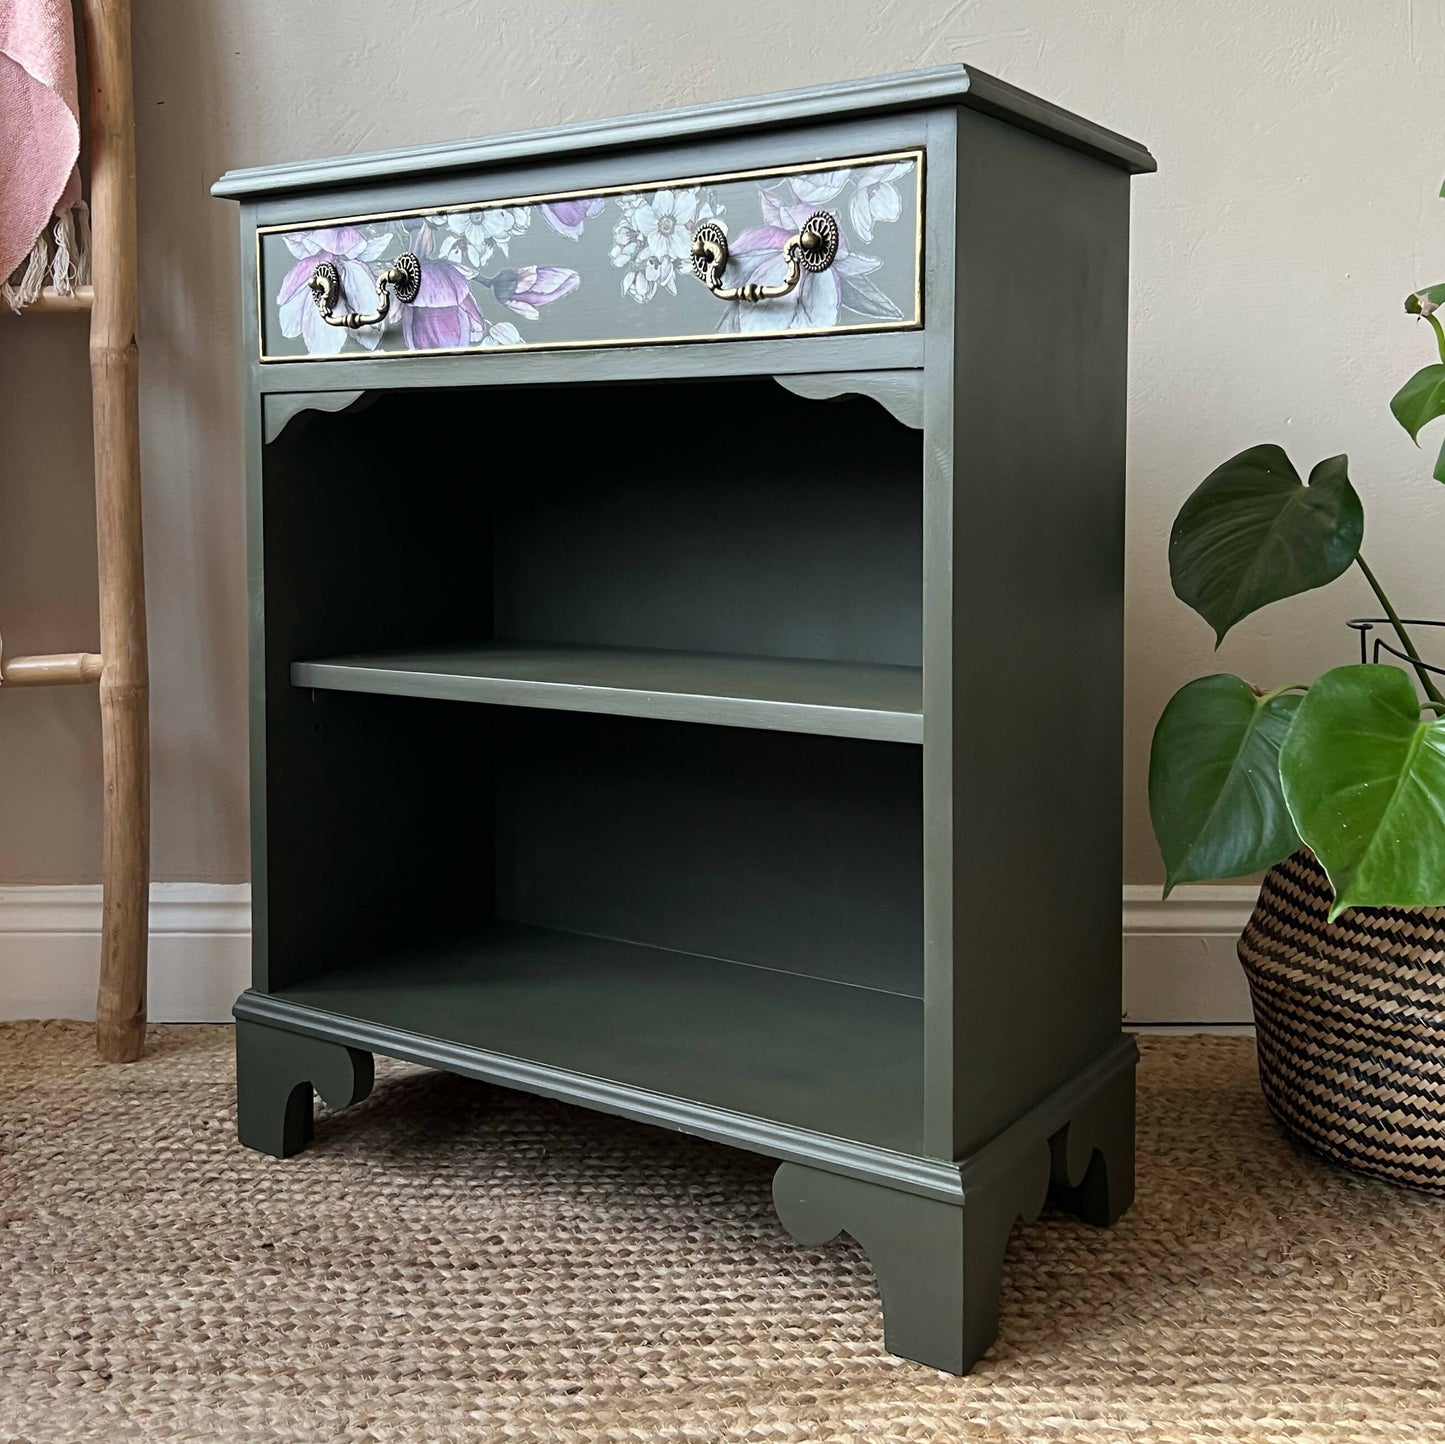 Vintage bookcase painted green with floral detail